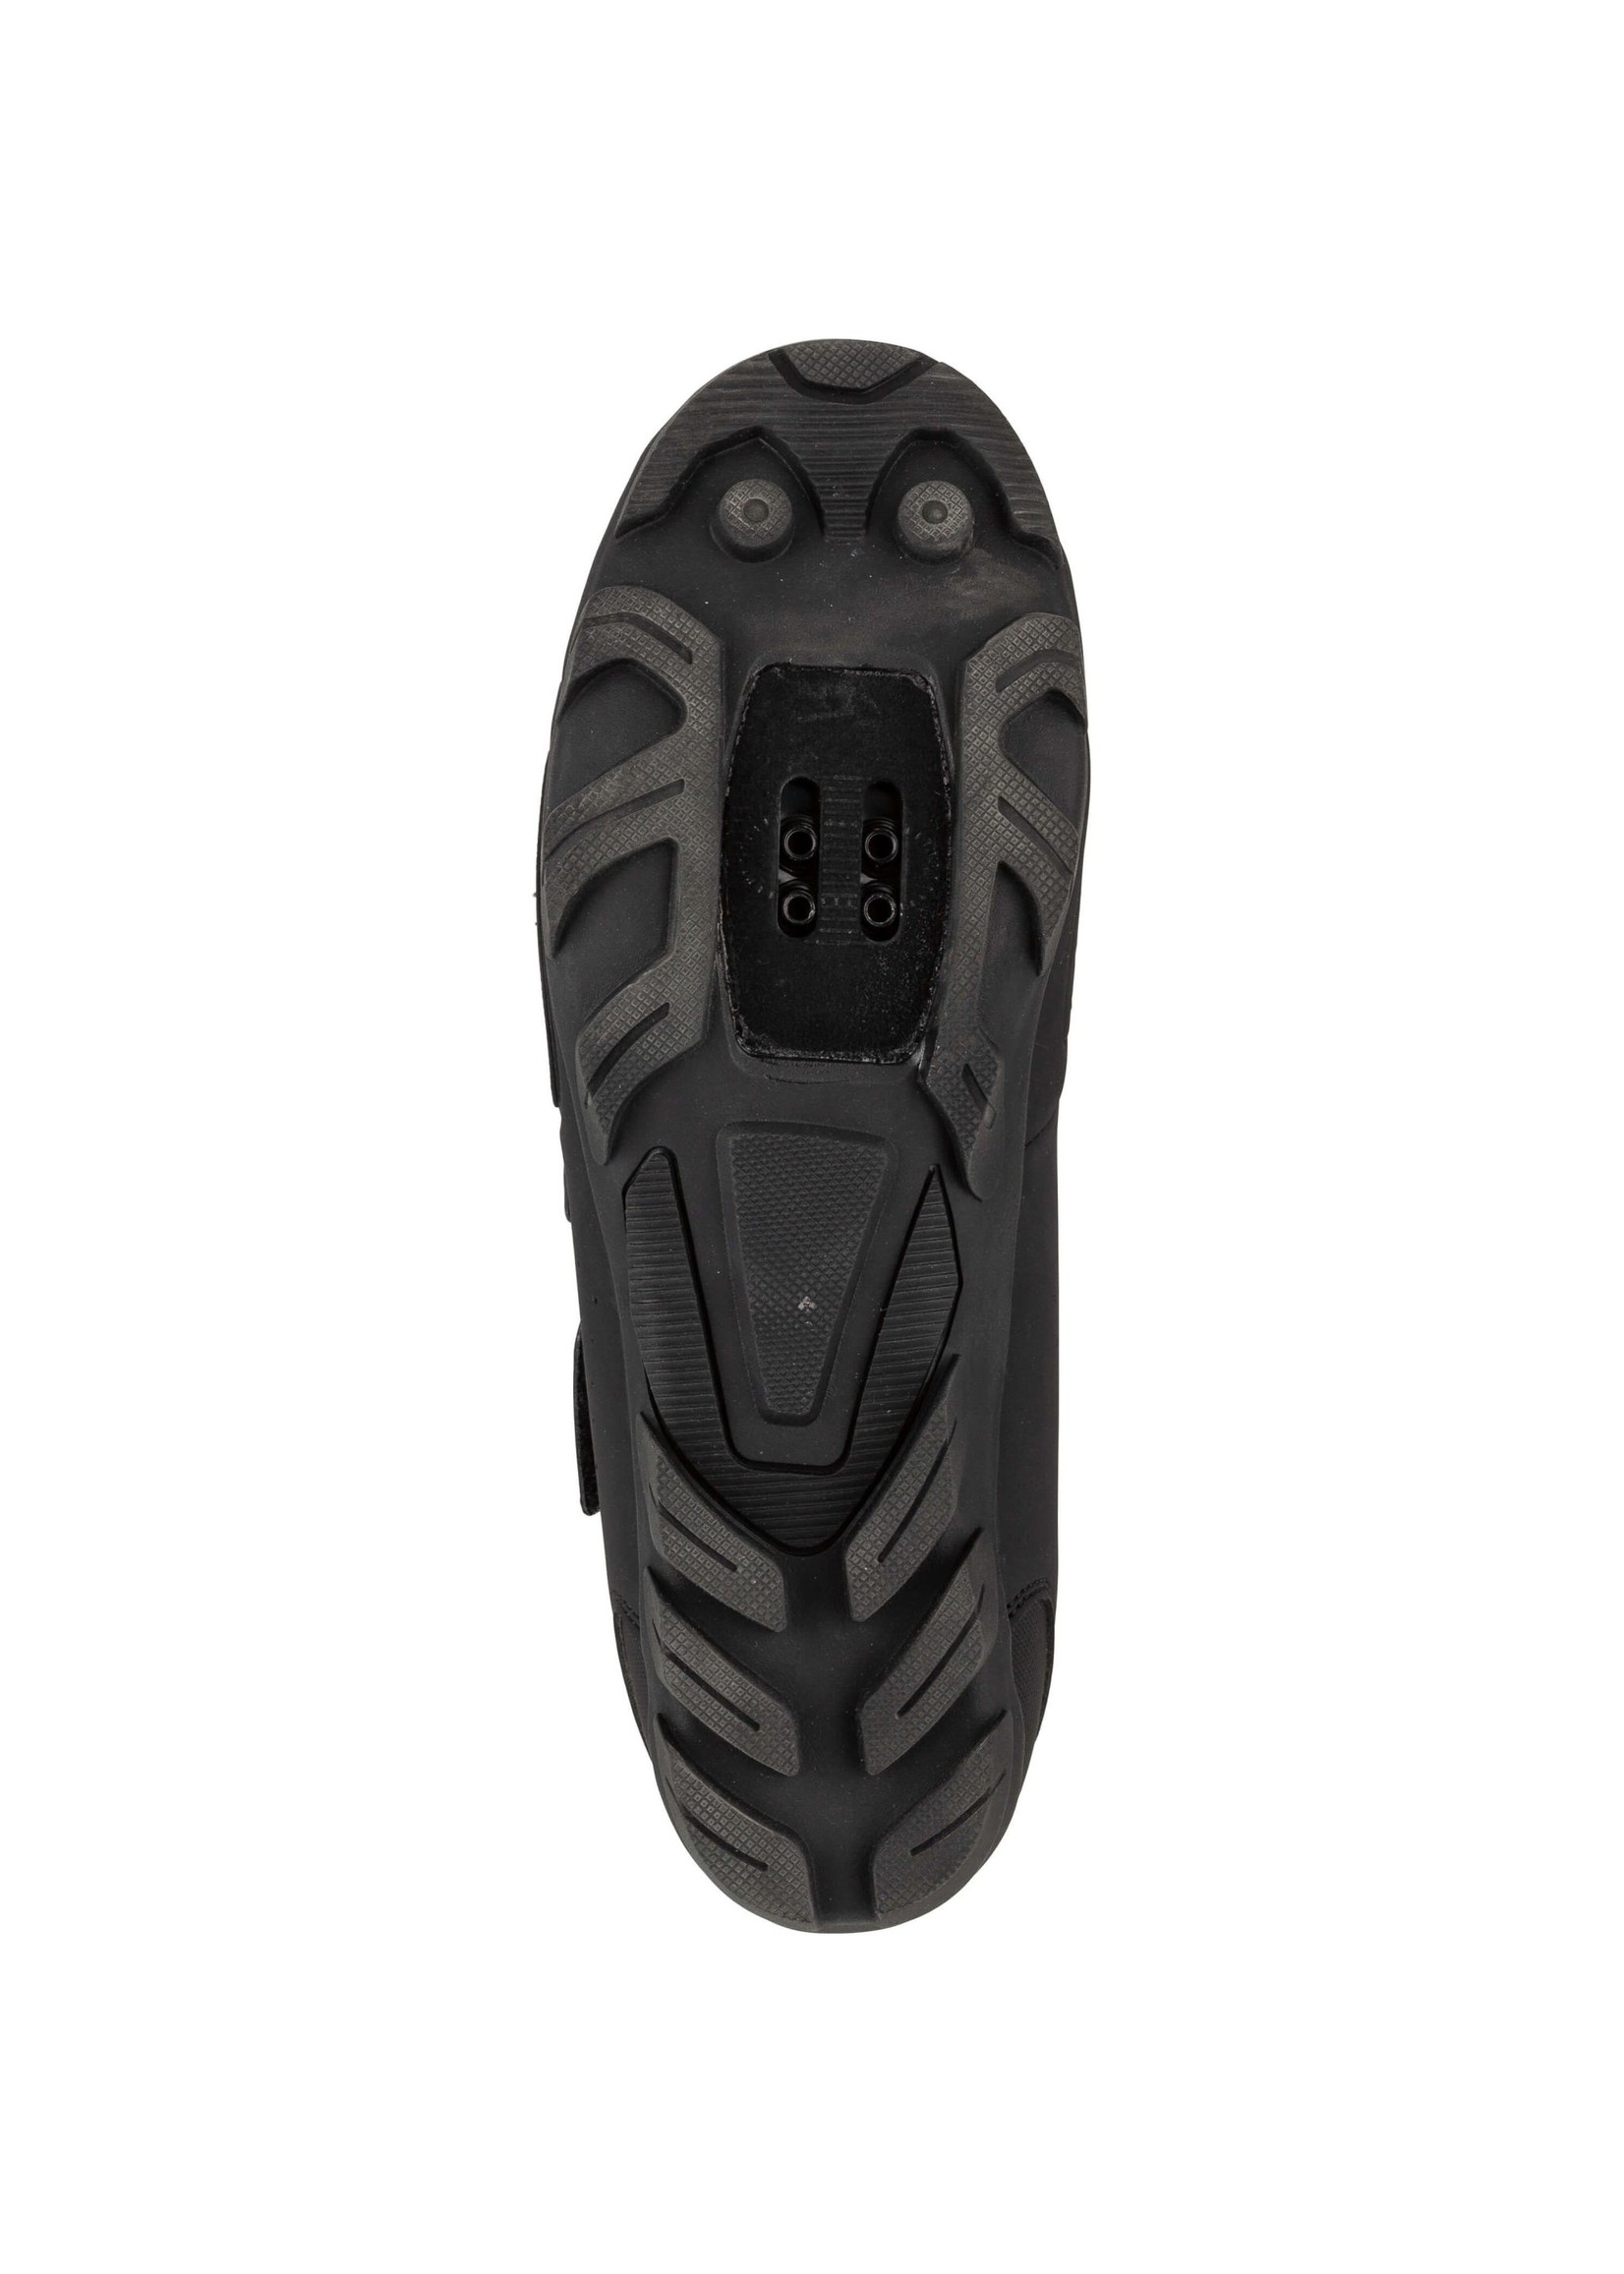 CHAMPION Souliers cyclistes Gravel II